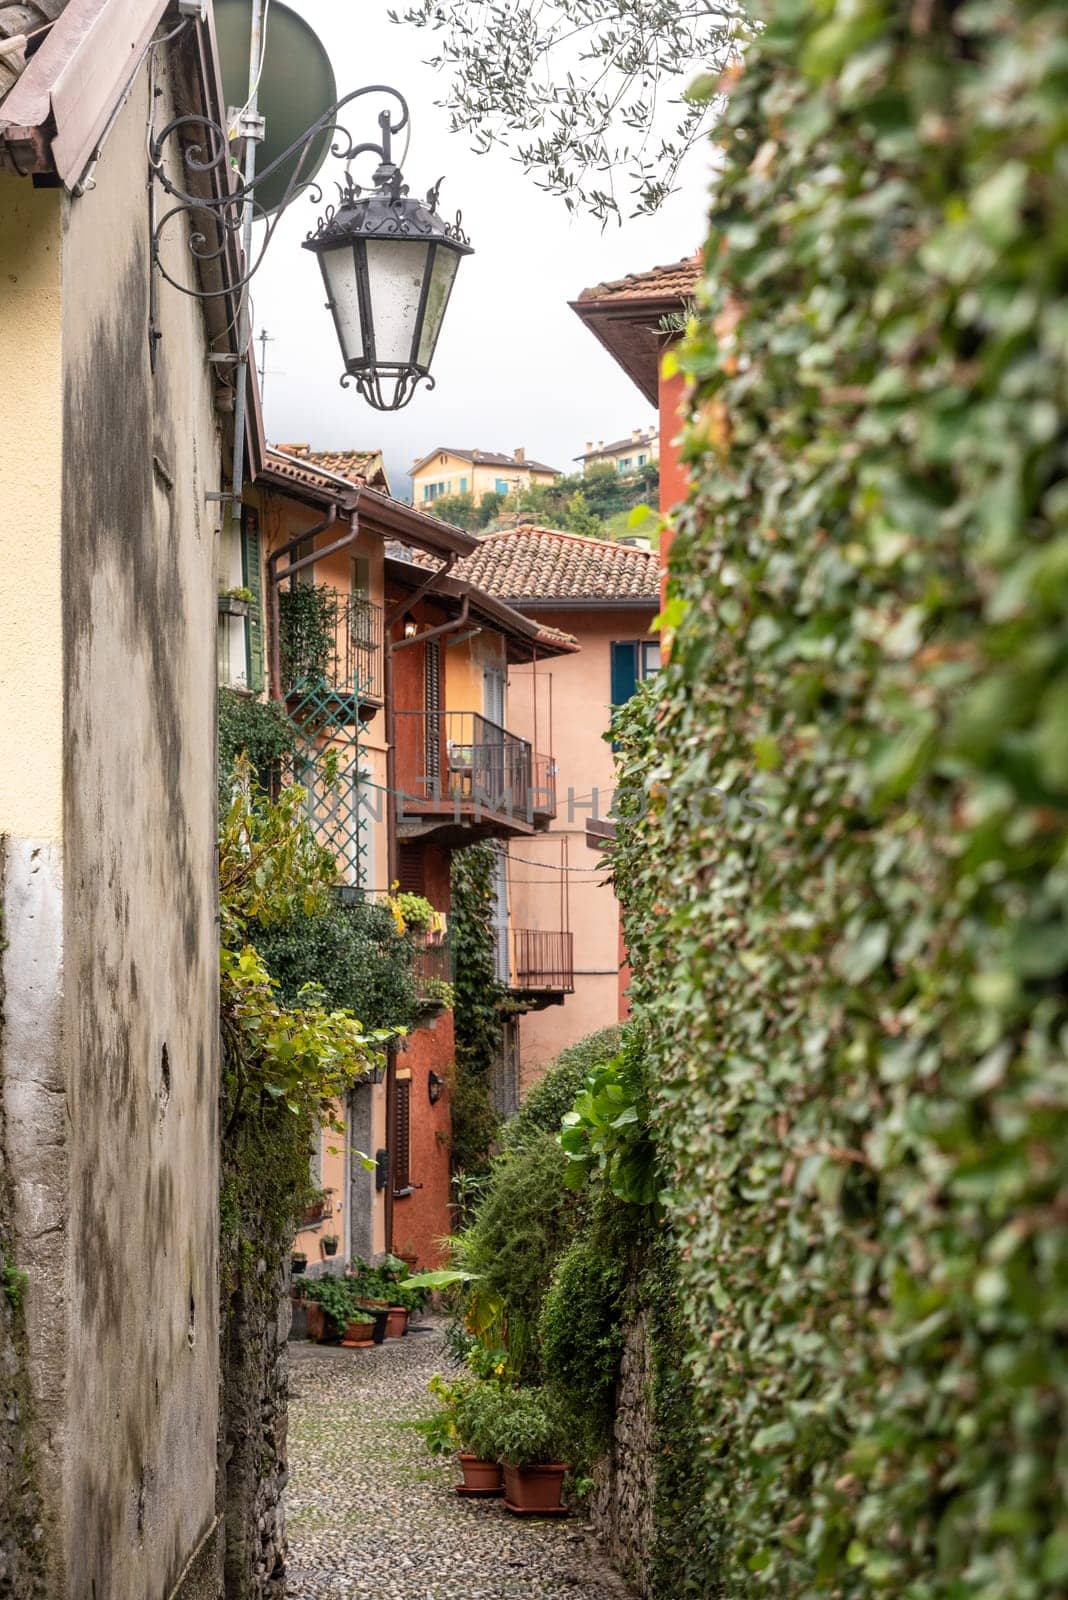 Enchanted alleyway in the scenic town of Bellagio at lake Como, Italy